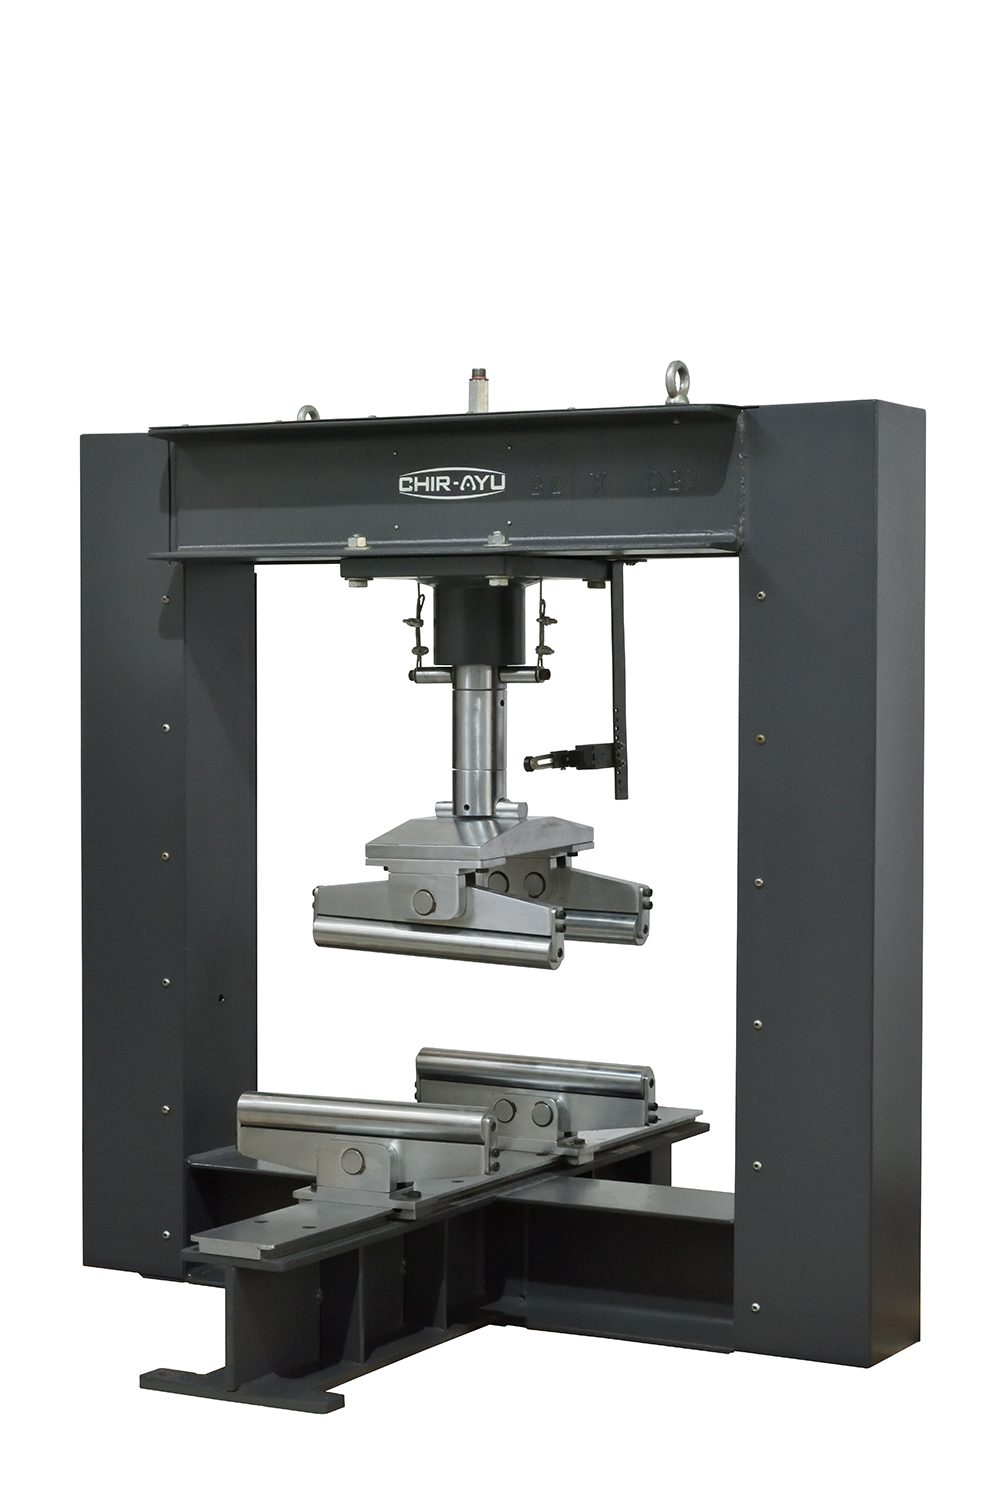  Wizard Auto 100 KN- Automatic Flexural Testing Machines-FT090